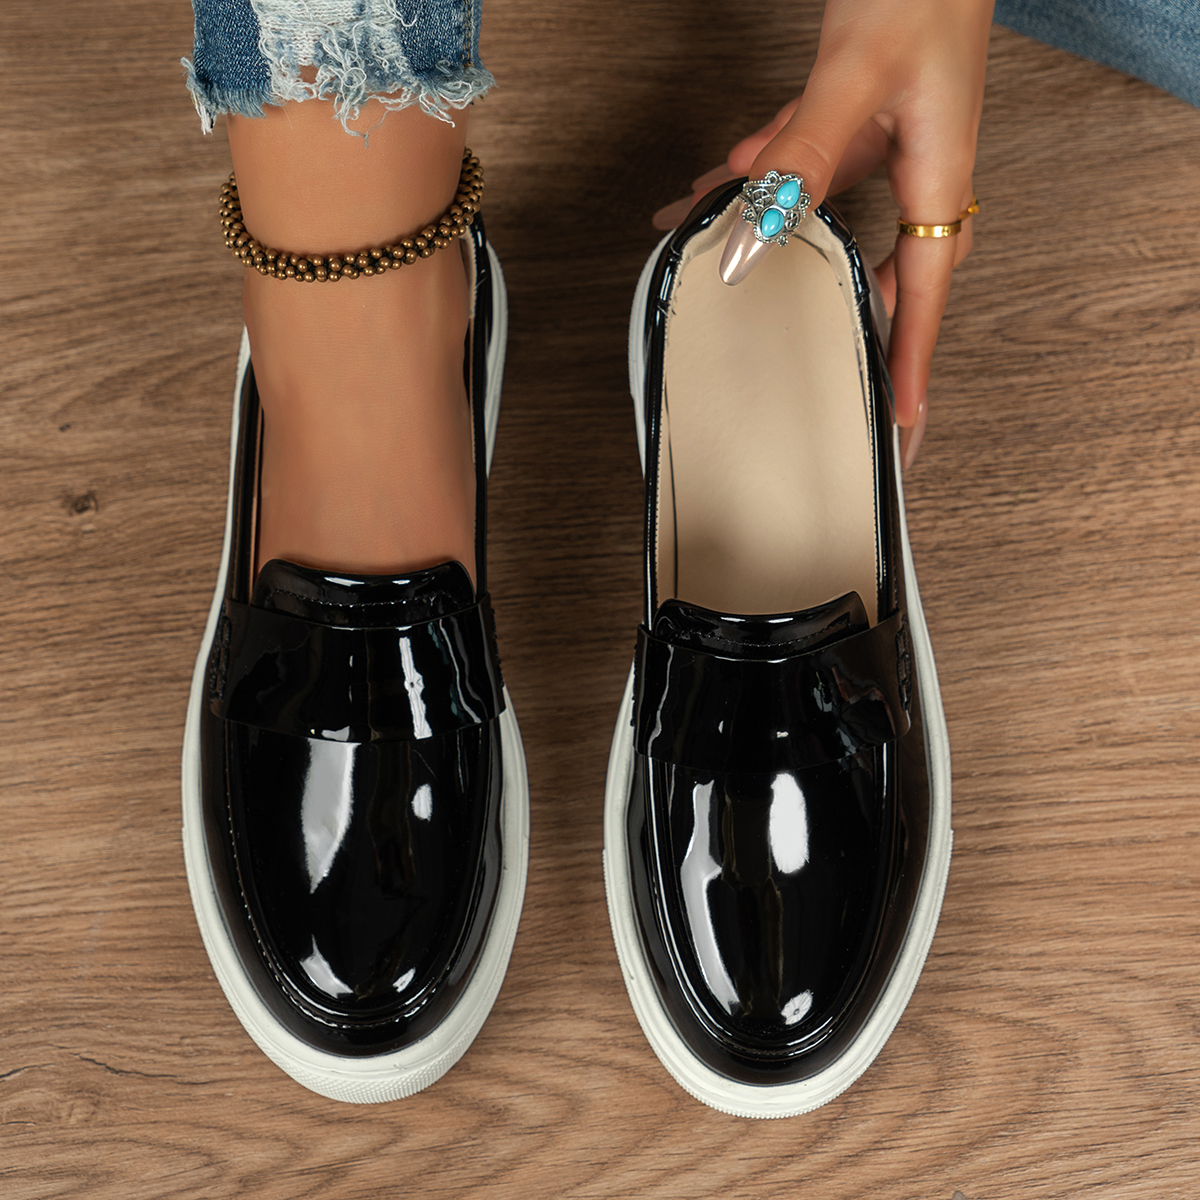 Women's Casual Glossy Comfort Loafers - 2 Colors Black and White